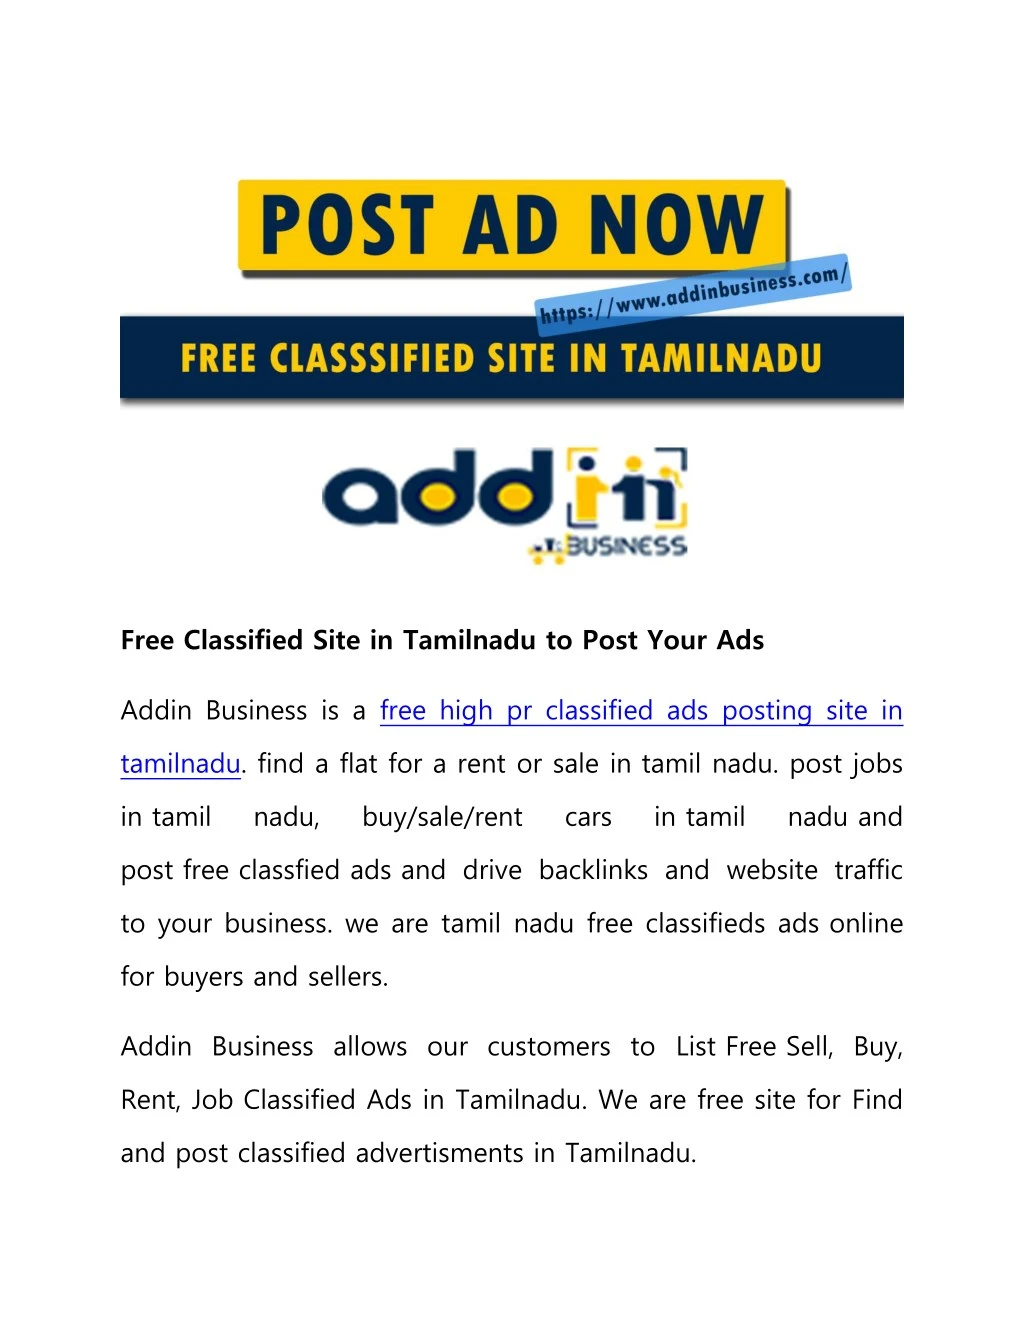 free classified site in tamilnadu to post your ads